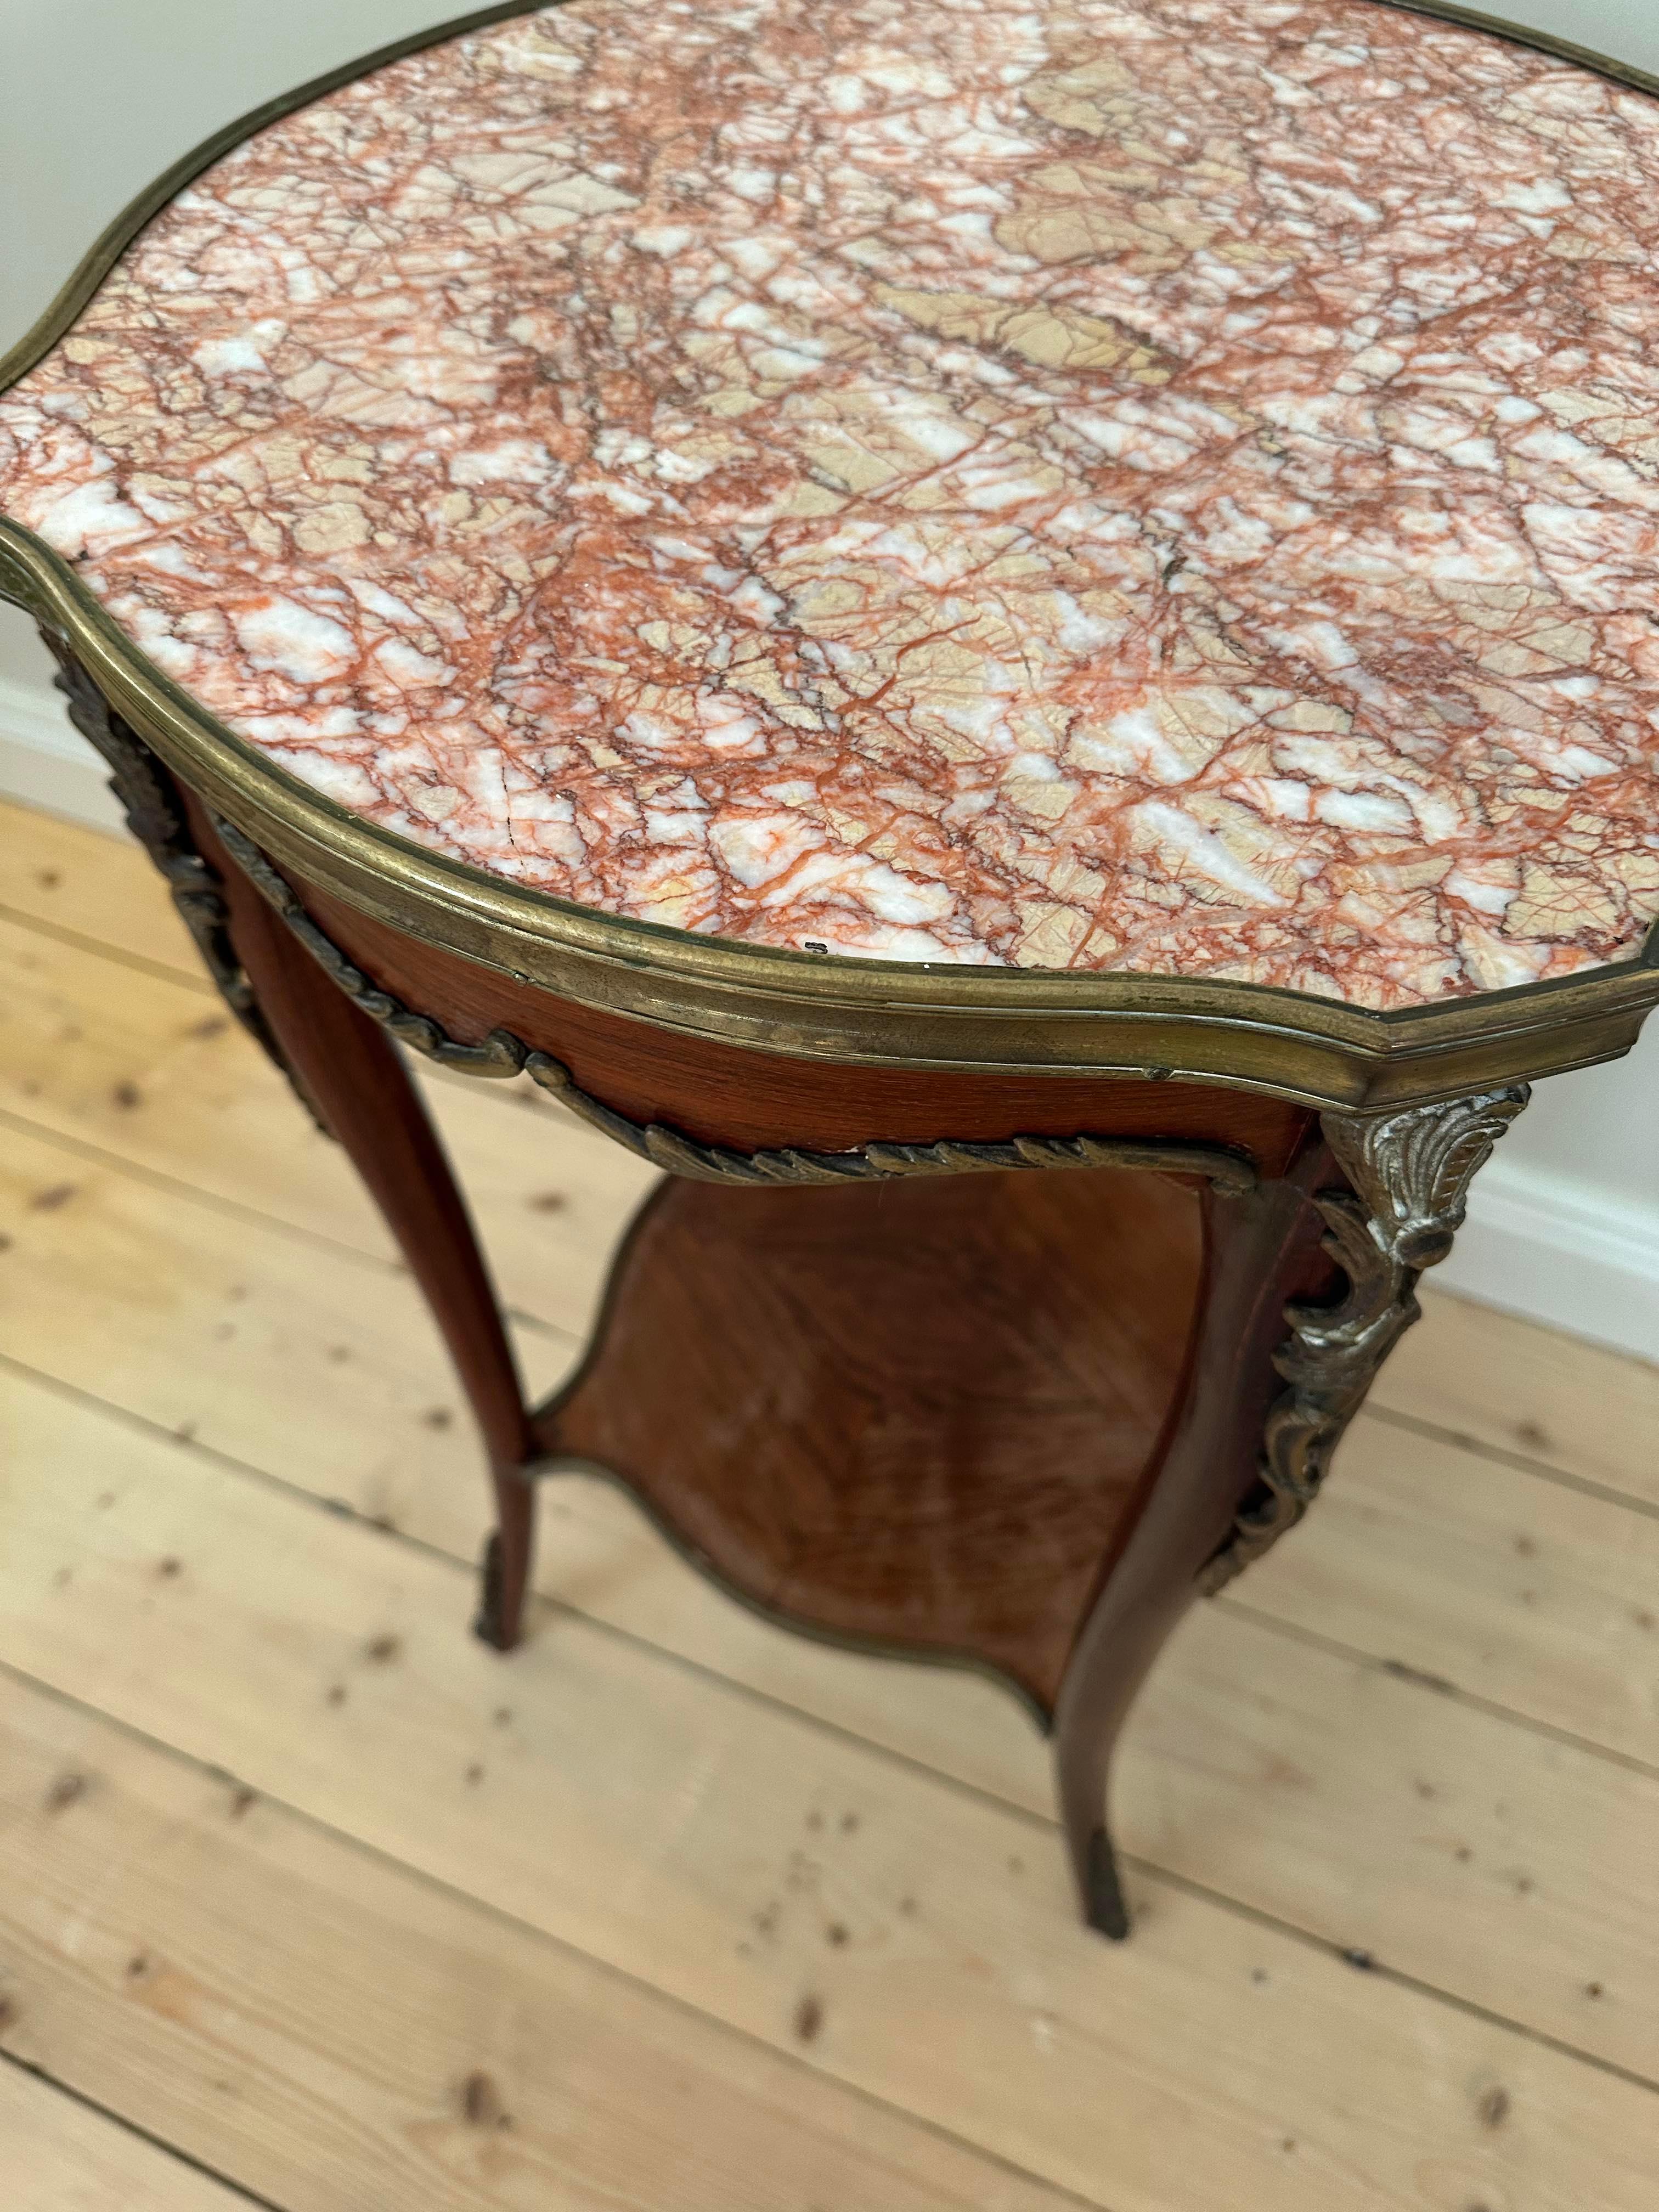 This beautiful table is in ver good condition. Its found in Versailles, Paris. The marble is rare and the table is from early 20th century. 